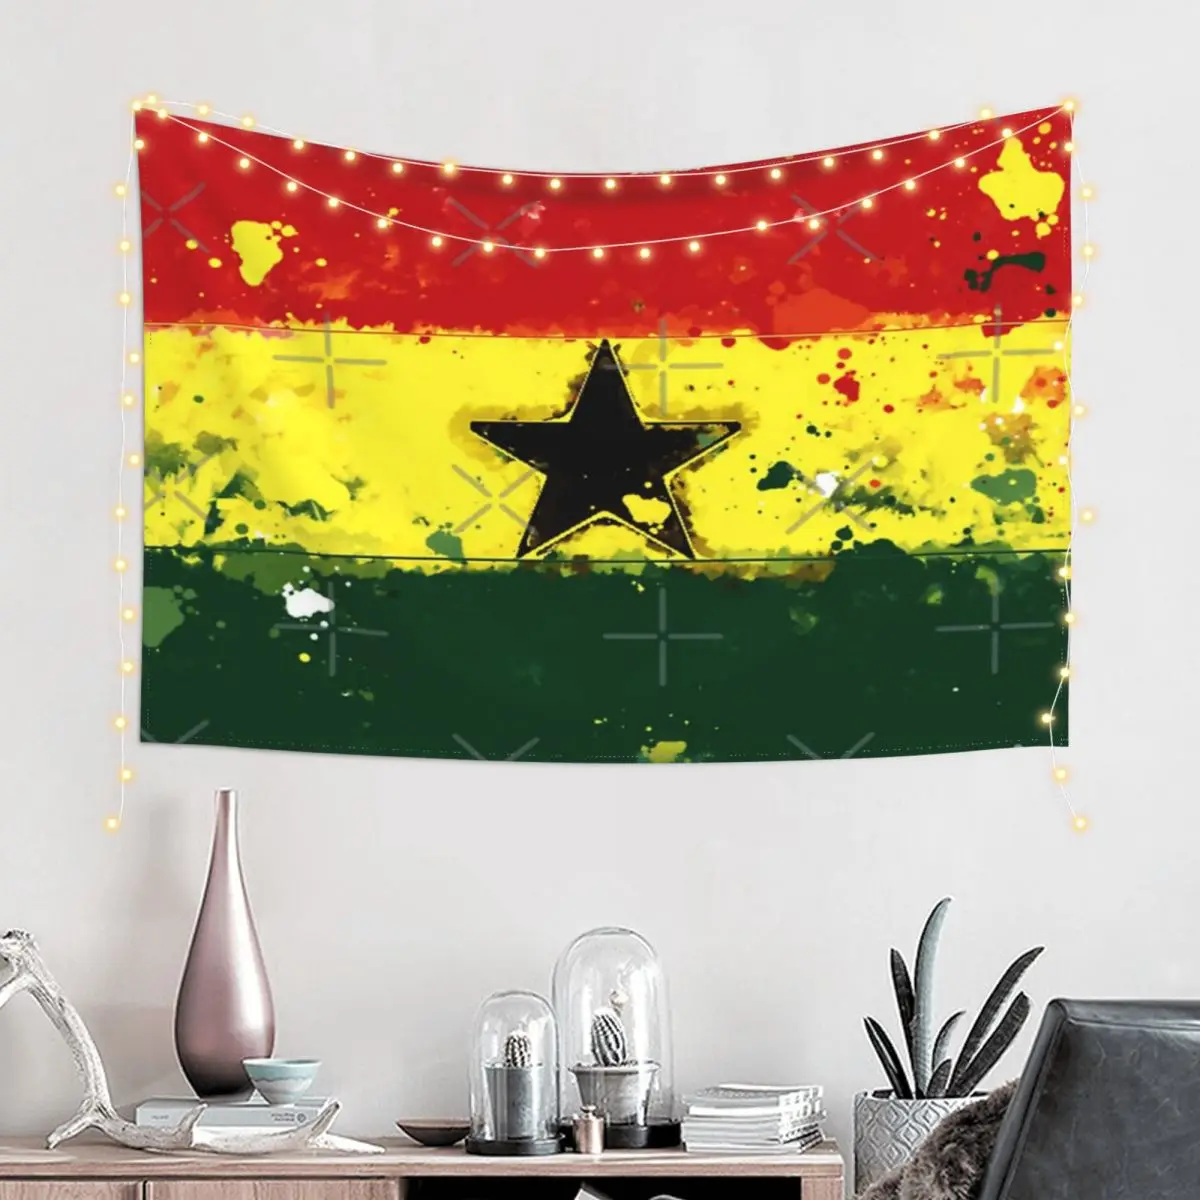 Ghana Grunge Flag Wall Decor Tapestry With Non Marking Nail Hooks Living Room Holiday Soft Fabric Bedspread Bright Multi Style